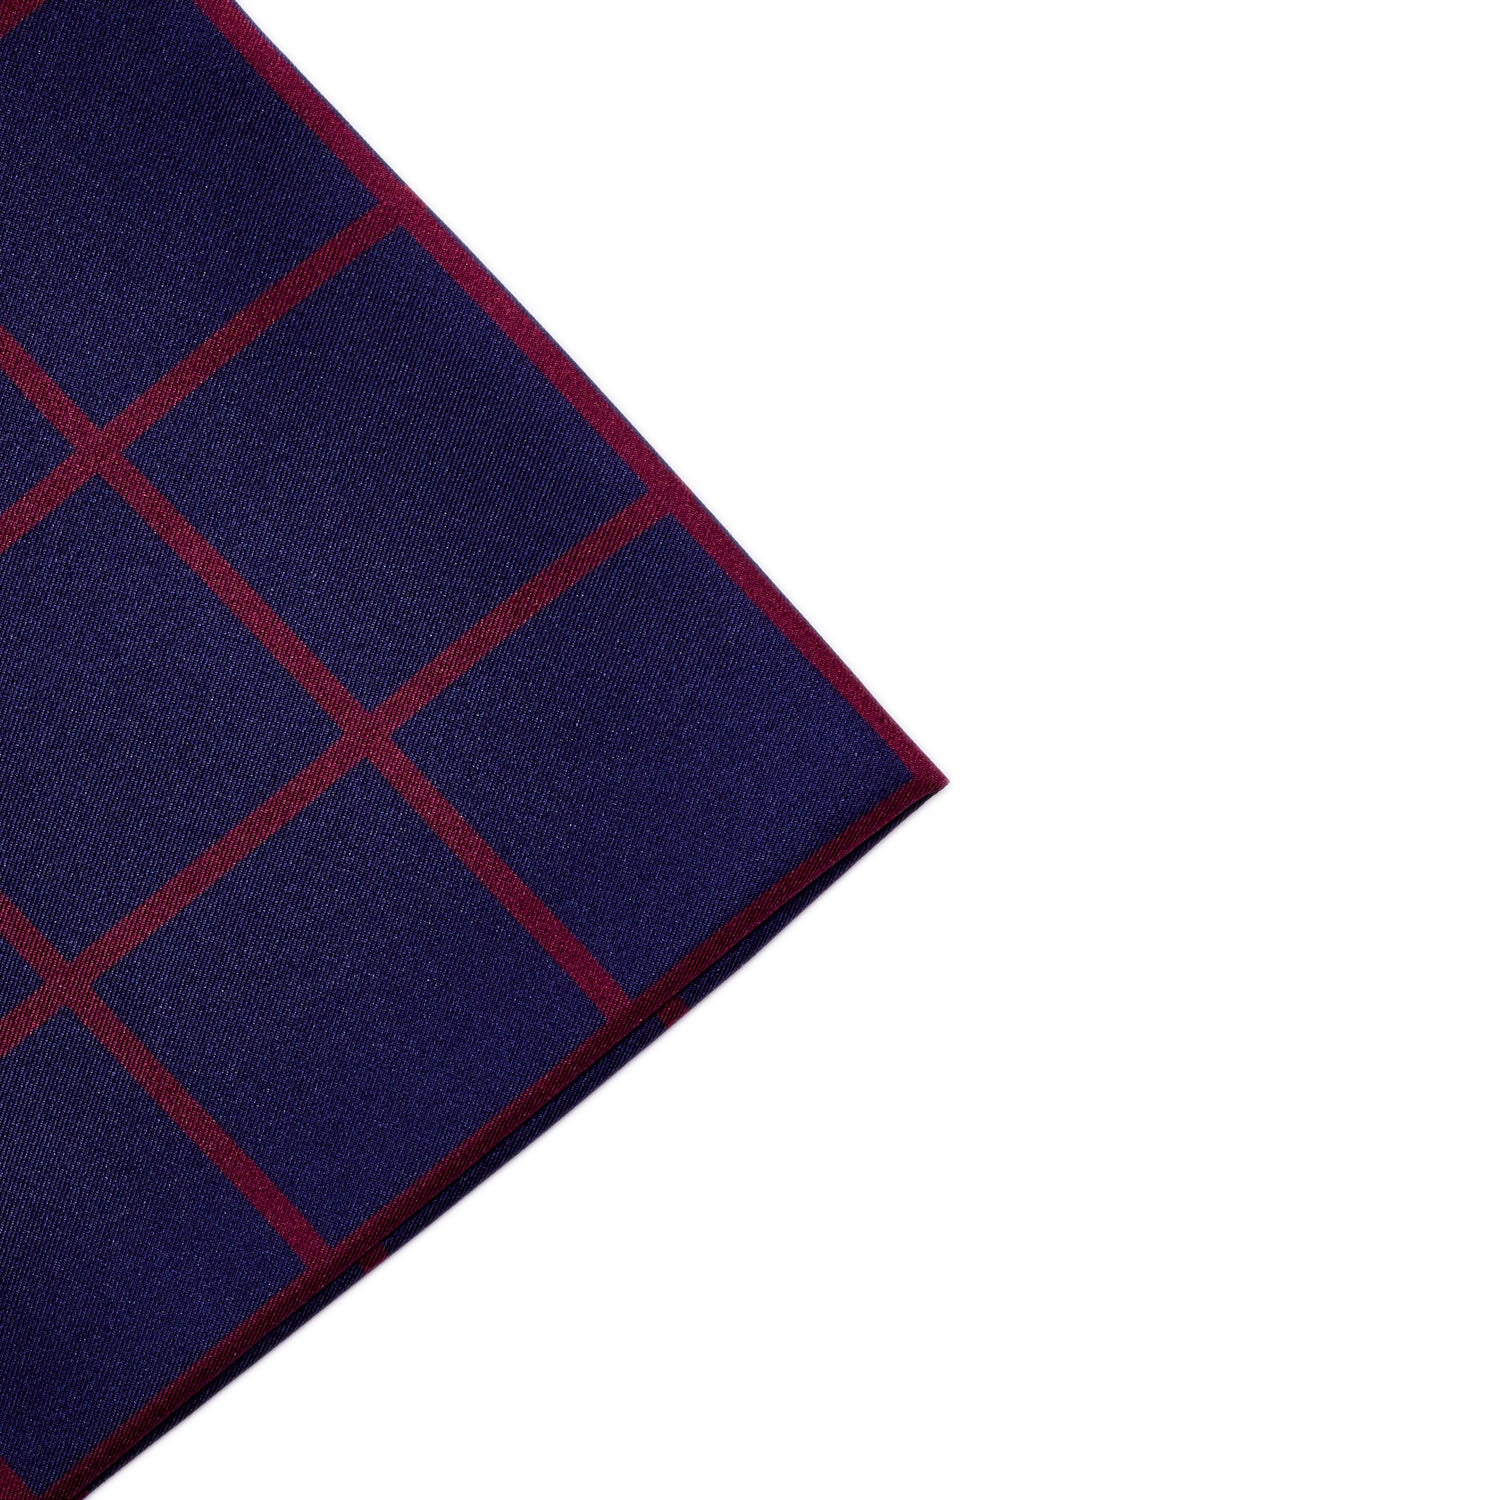 A Sovereign Grade Prince of Wales Pocket Square, Navy/Burgundy from KirbyAllison.com in blue and red.